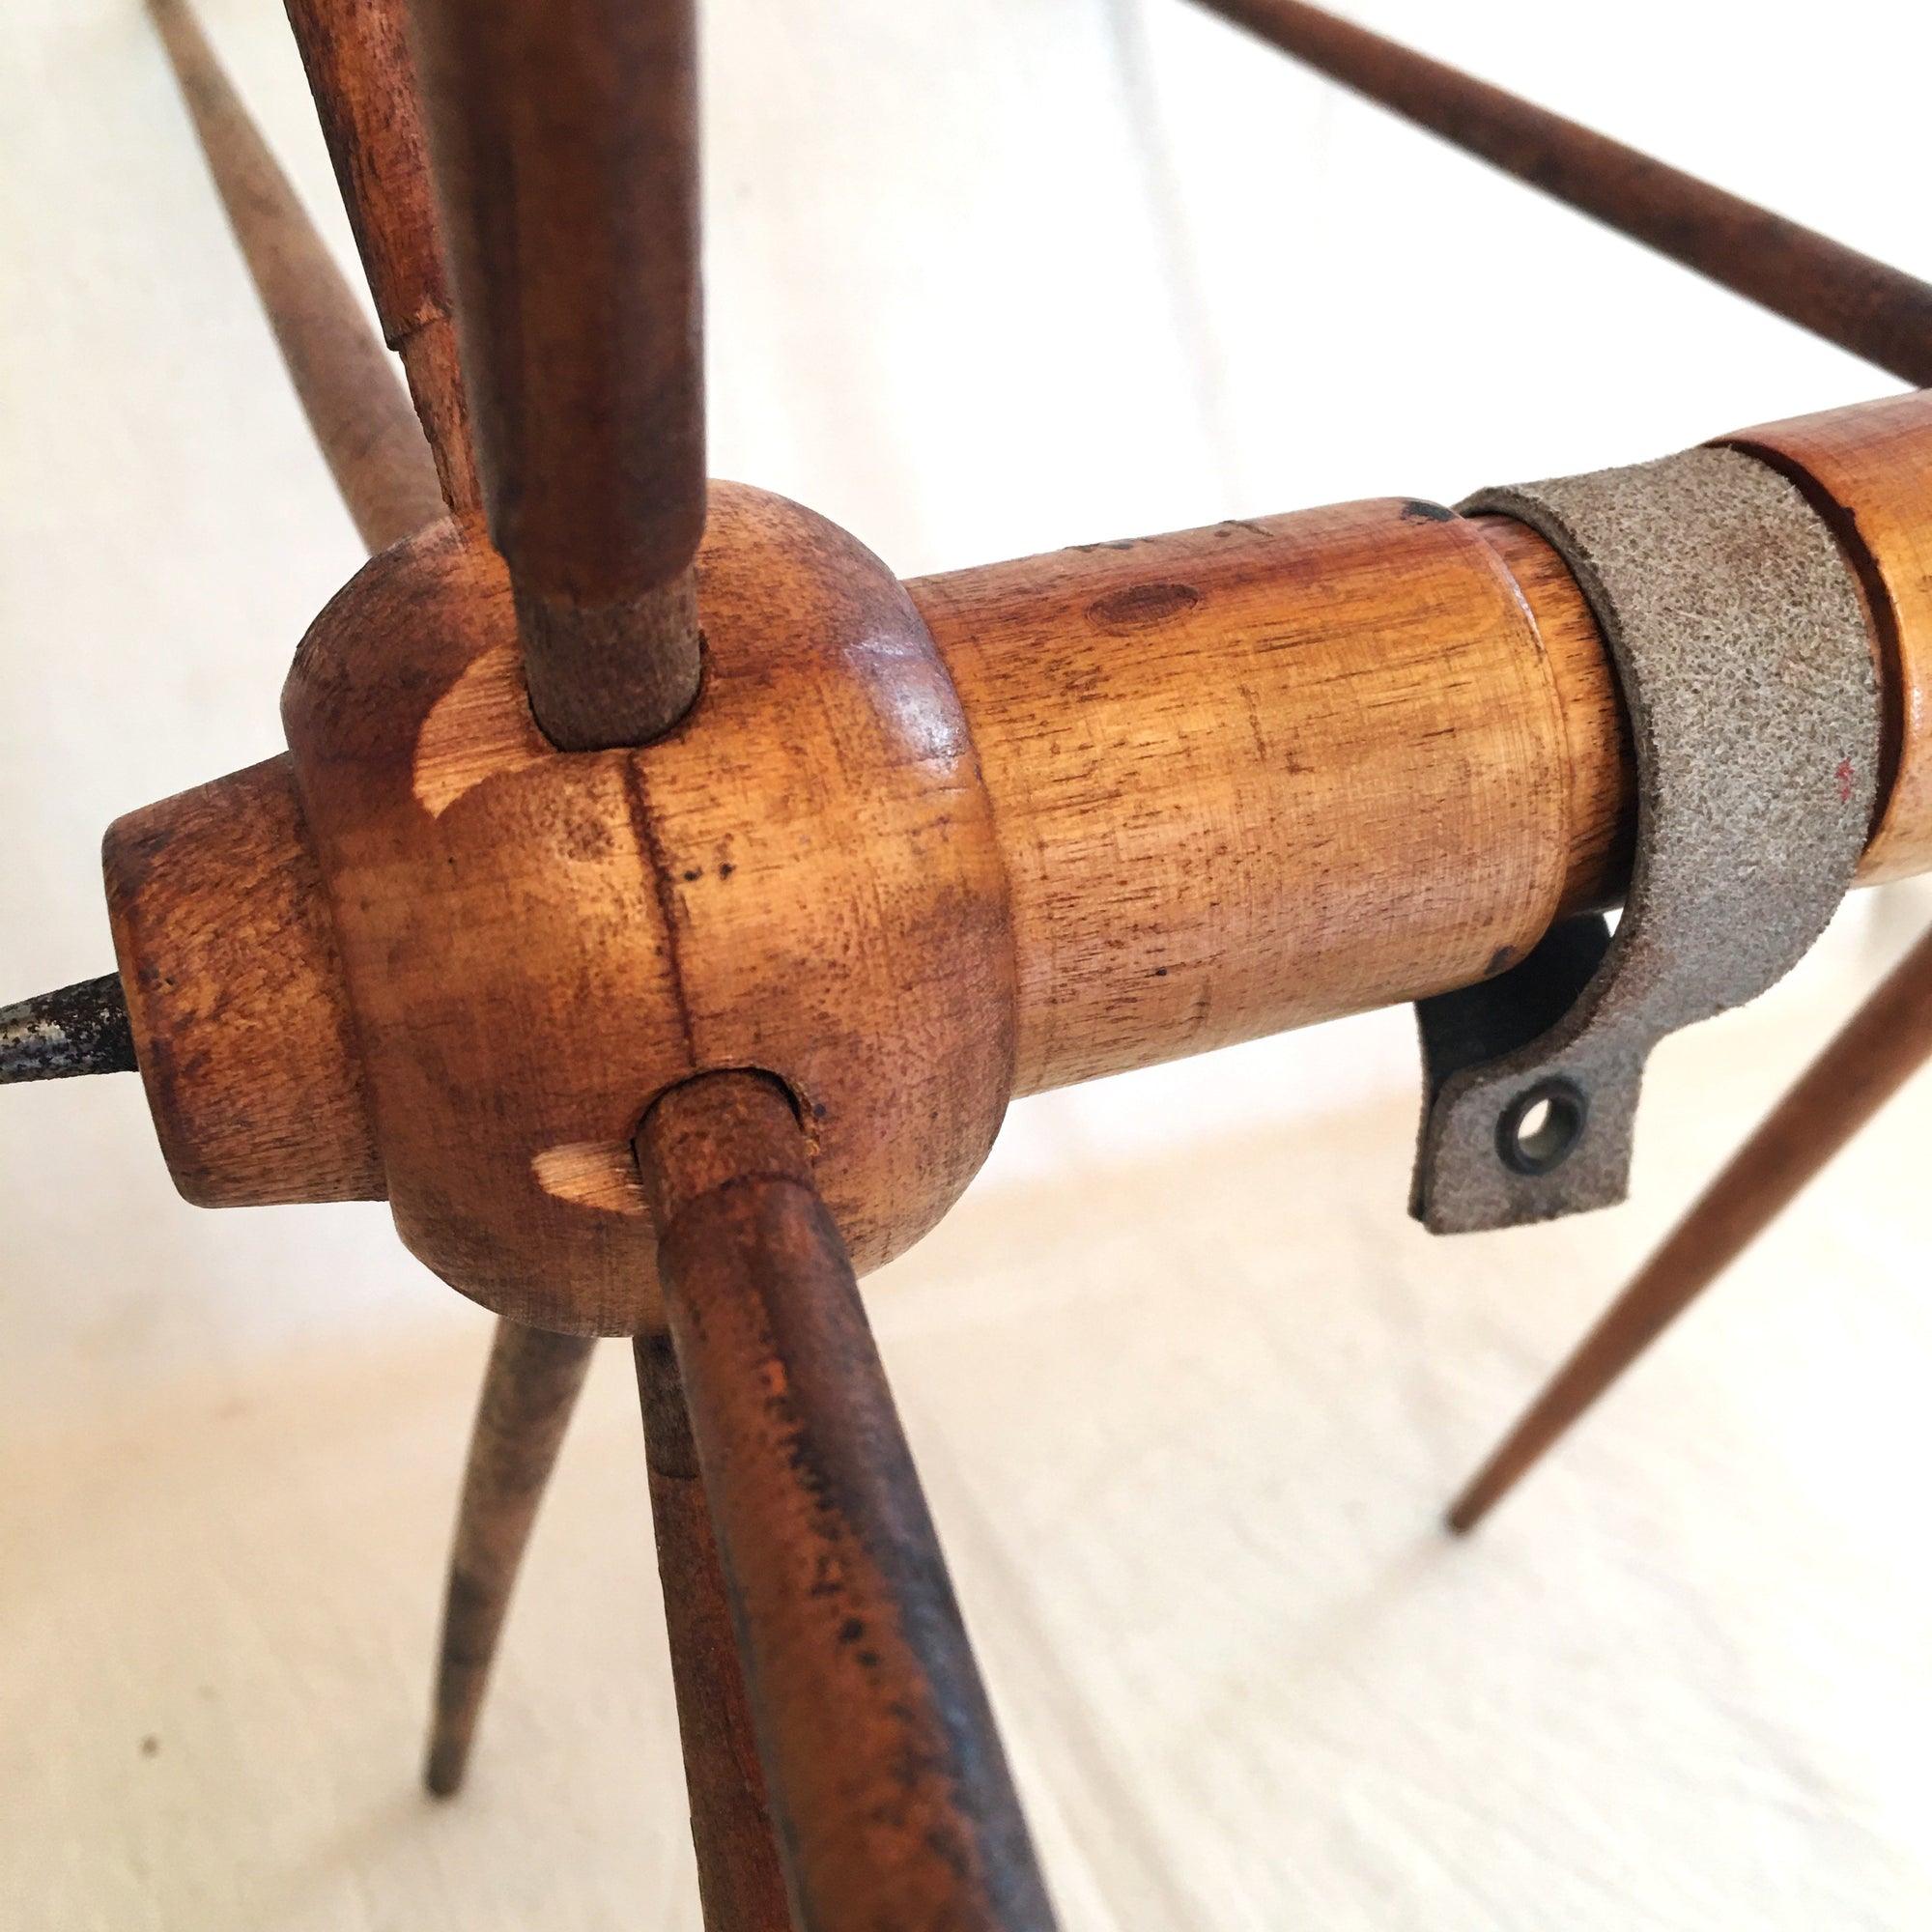 1920’s – 1930’s Silk Winder from Textile Mill